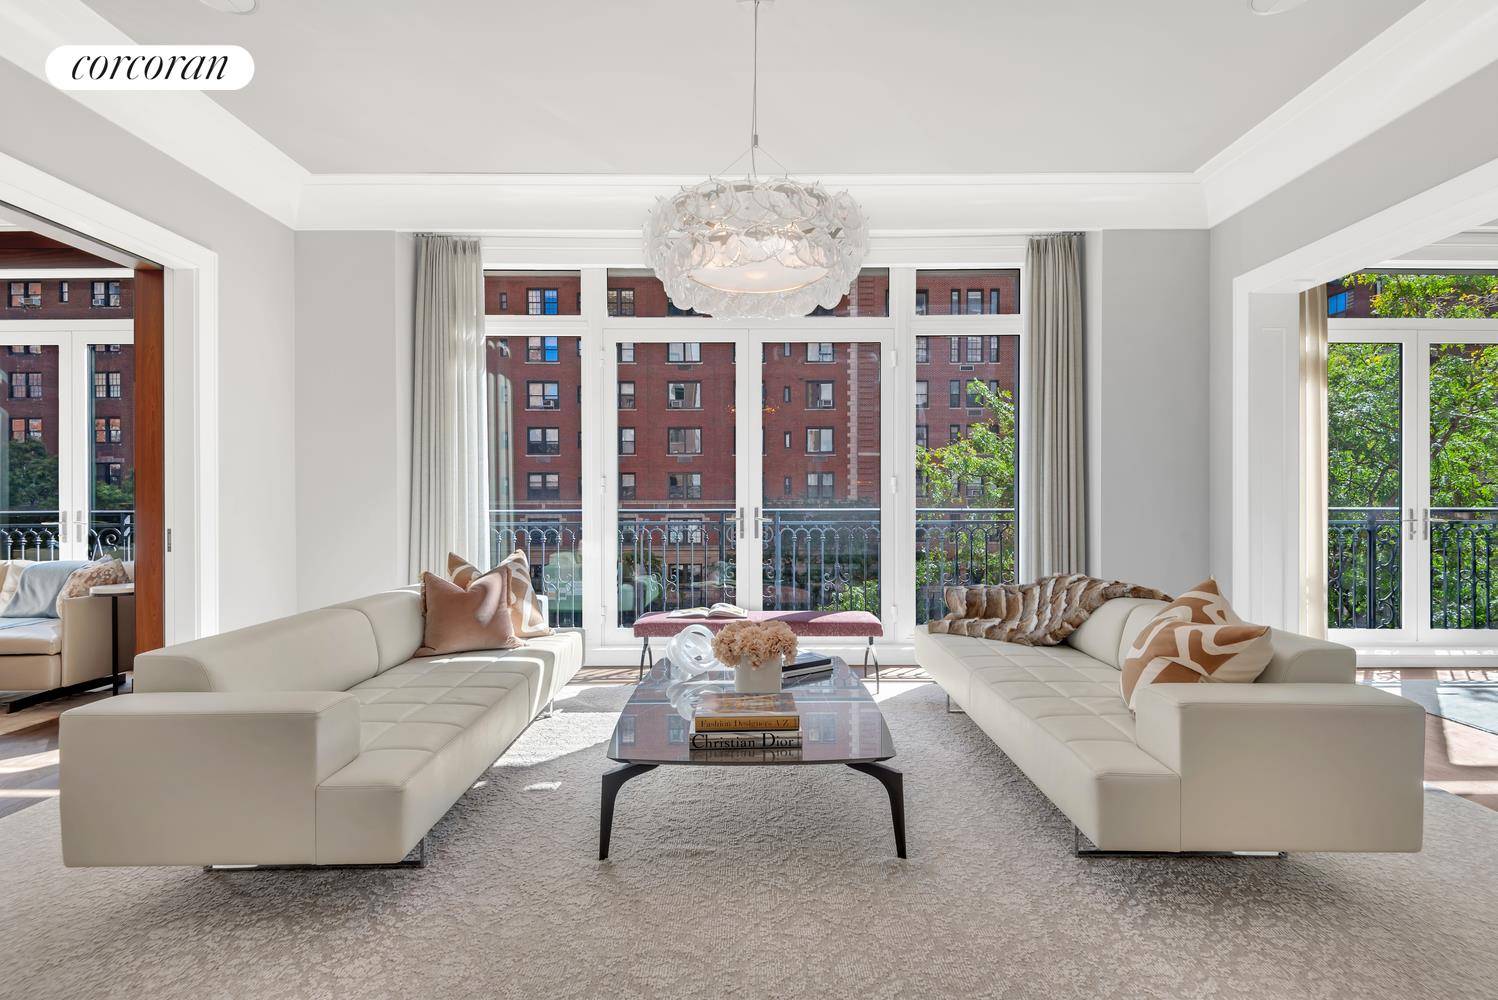 Extraordinary features come together in this stunning 7 room full floor condominium on the Upper East Side's 'Gold Coast' overlooking Park Avenue.